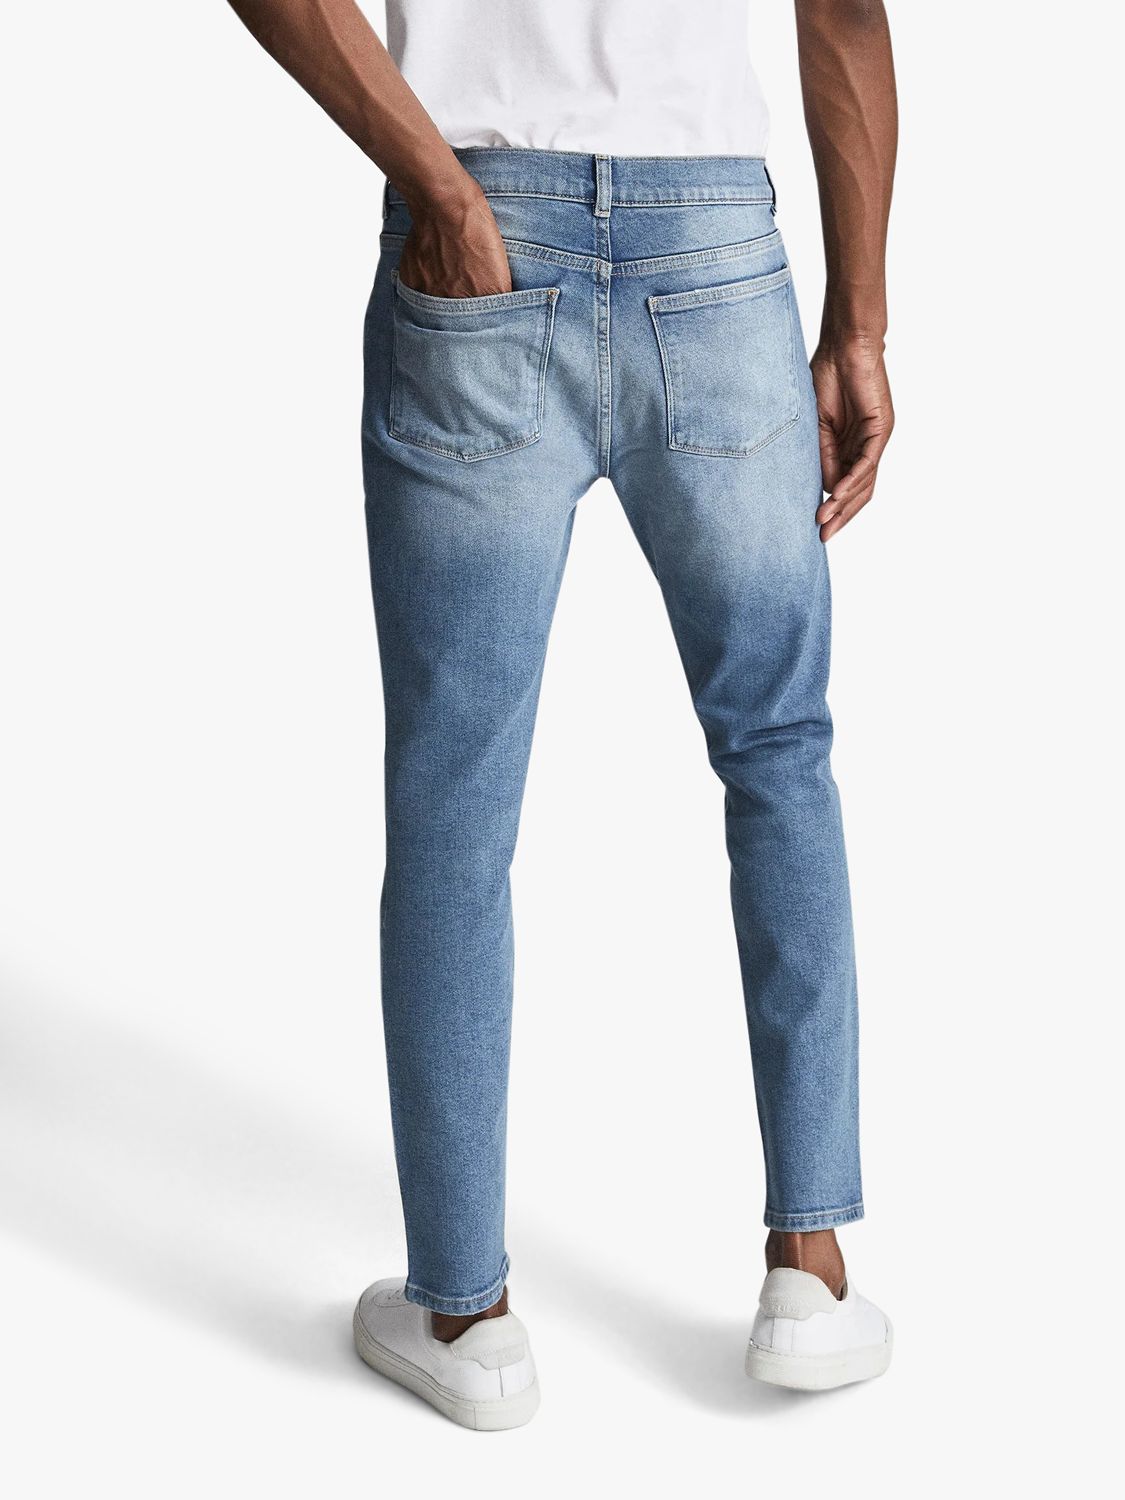 Reiss Cove Tapered Slim Fit Jeans, Washed Blue